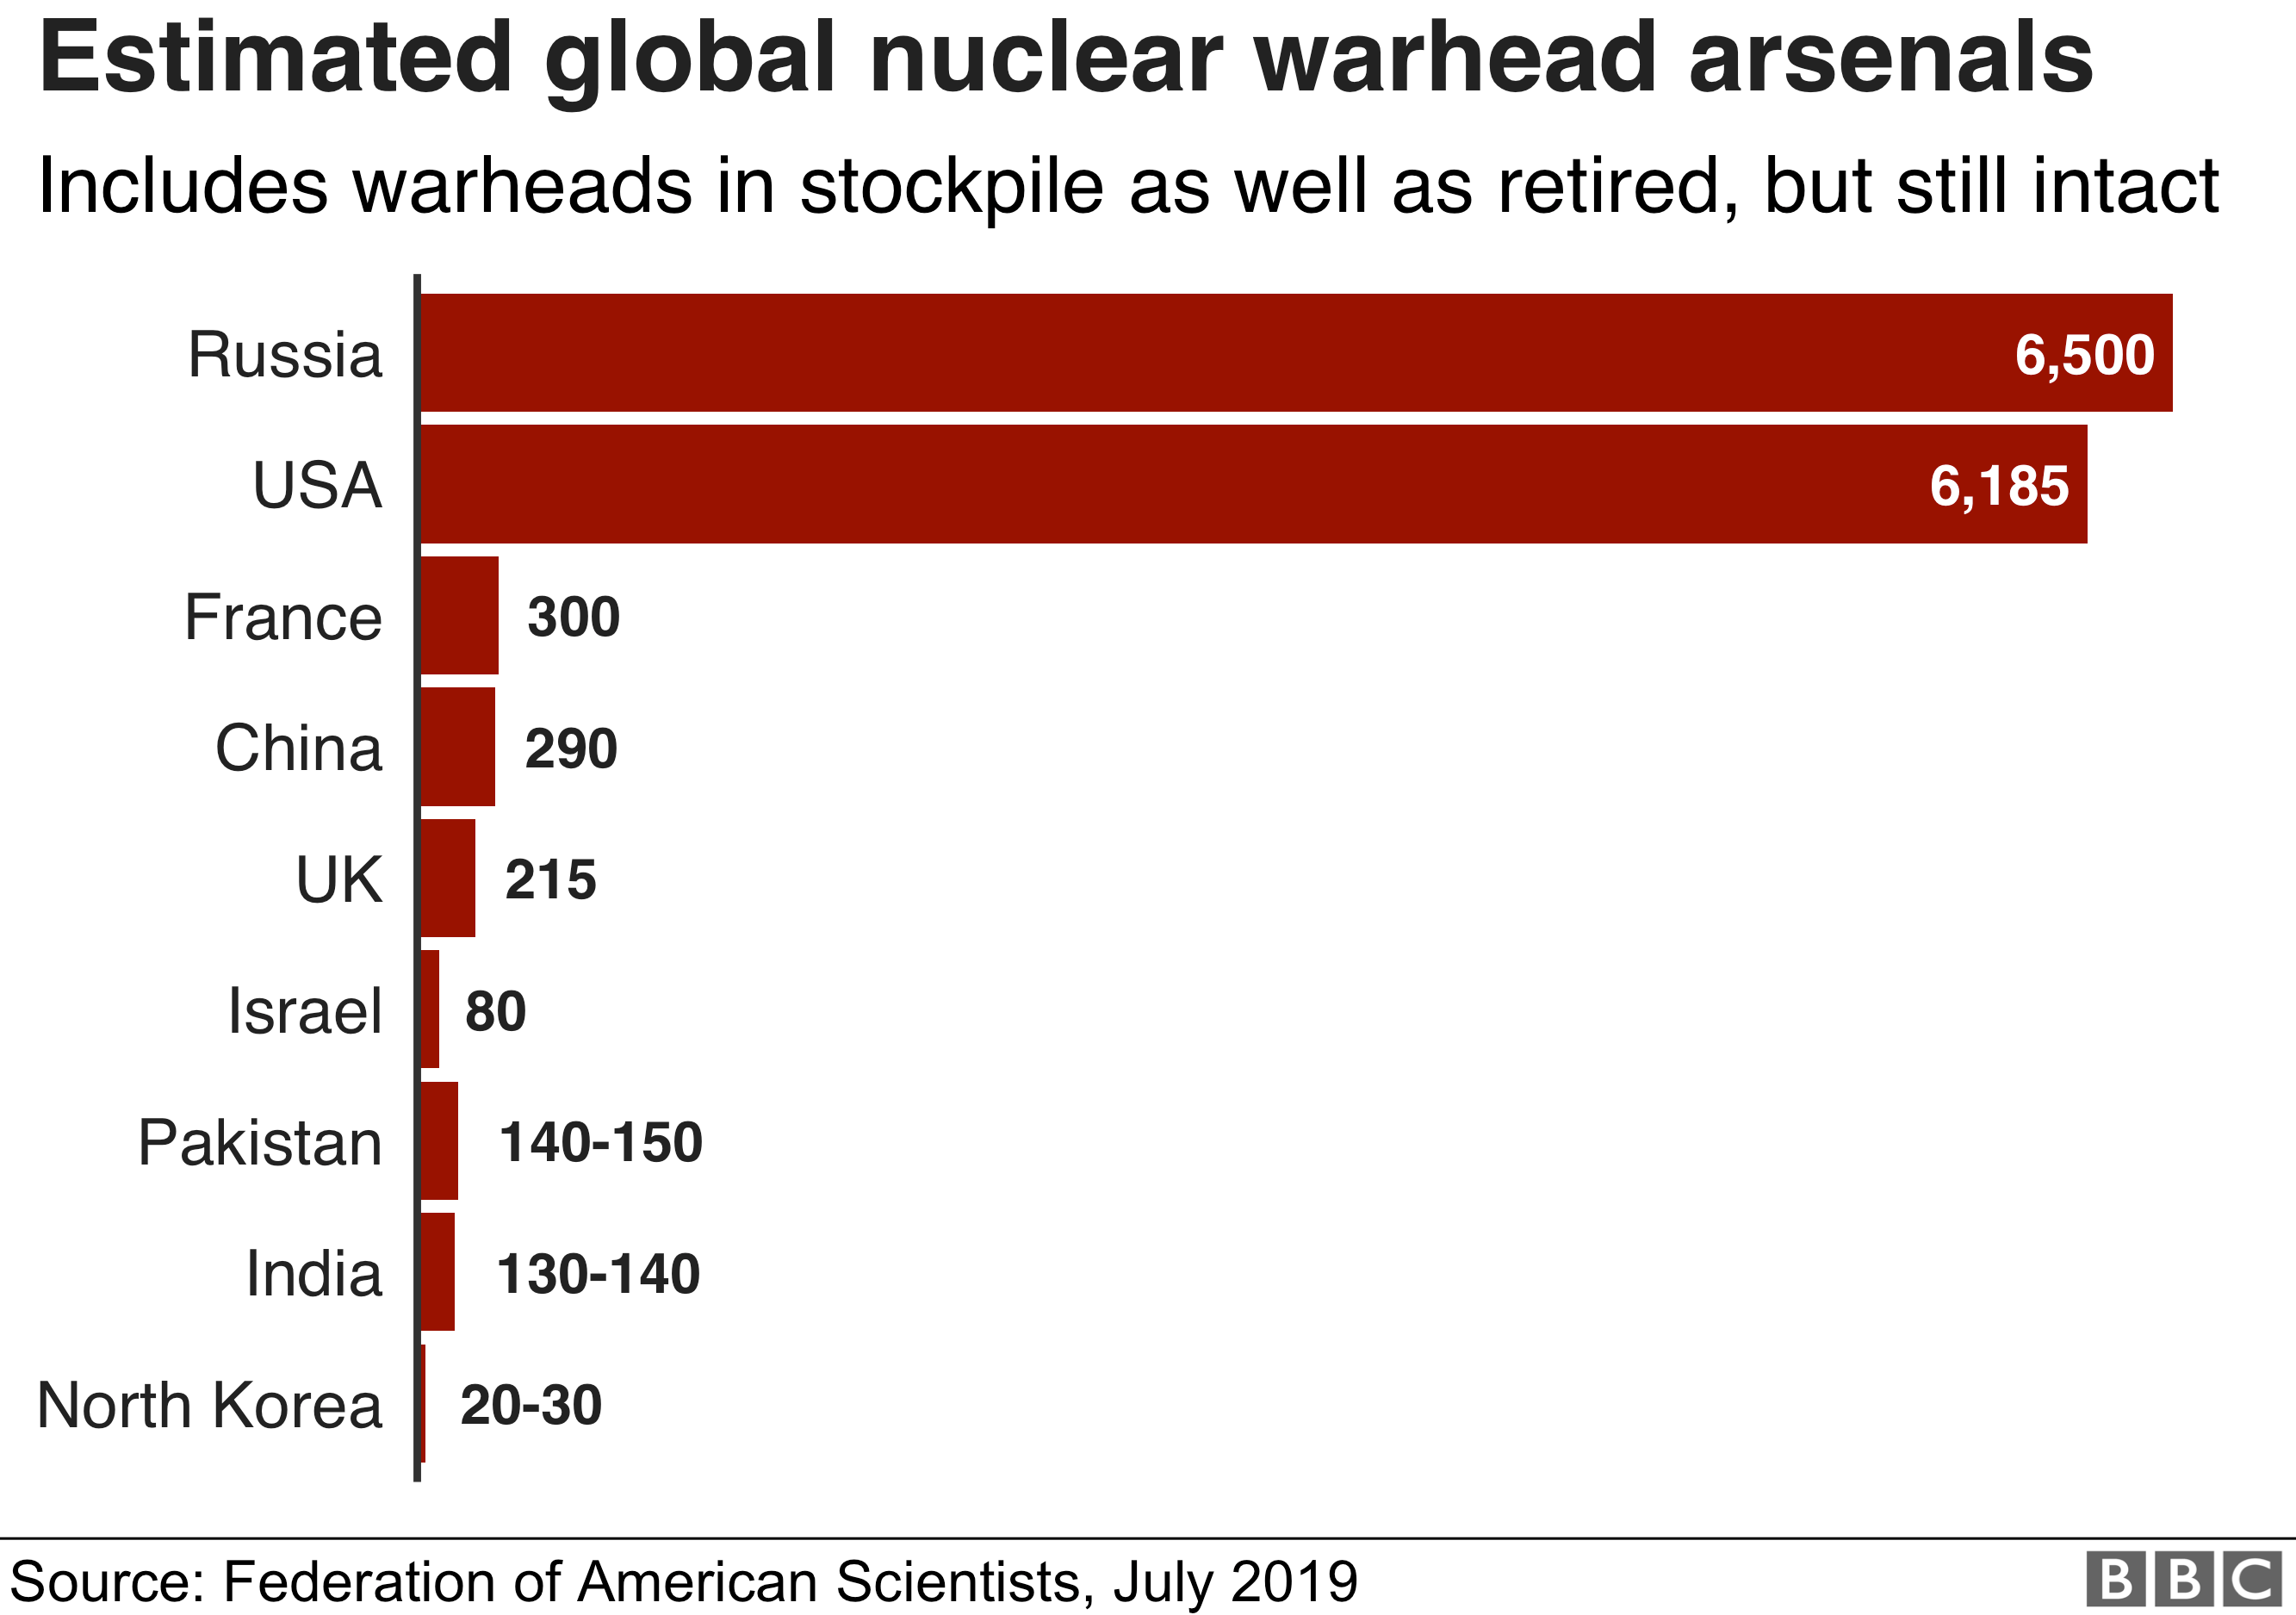 Bar chart showing estimated global nuclear warhead arsenals broken down by country